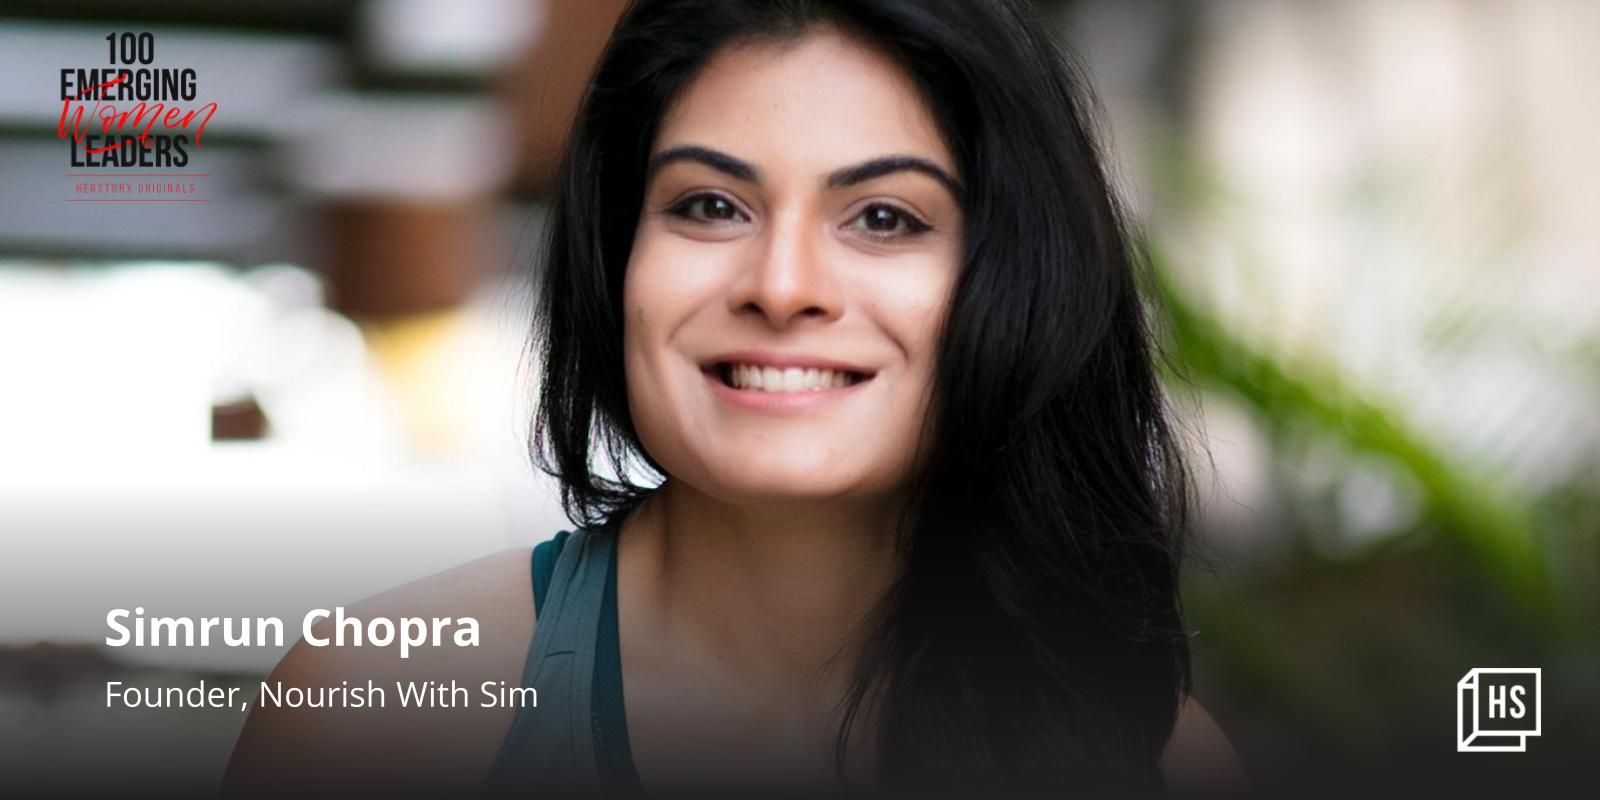 [100 Emerging Women Leaders] From battling PCOS to being healthy, Simrun Chopra wants women to join her fitness journey